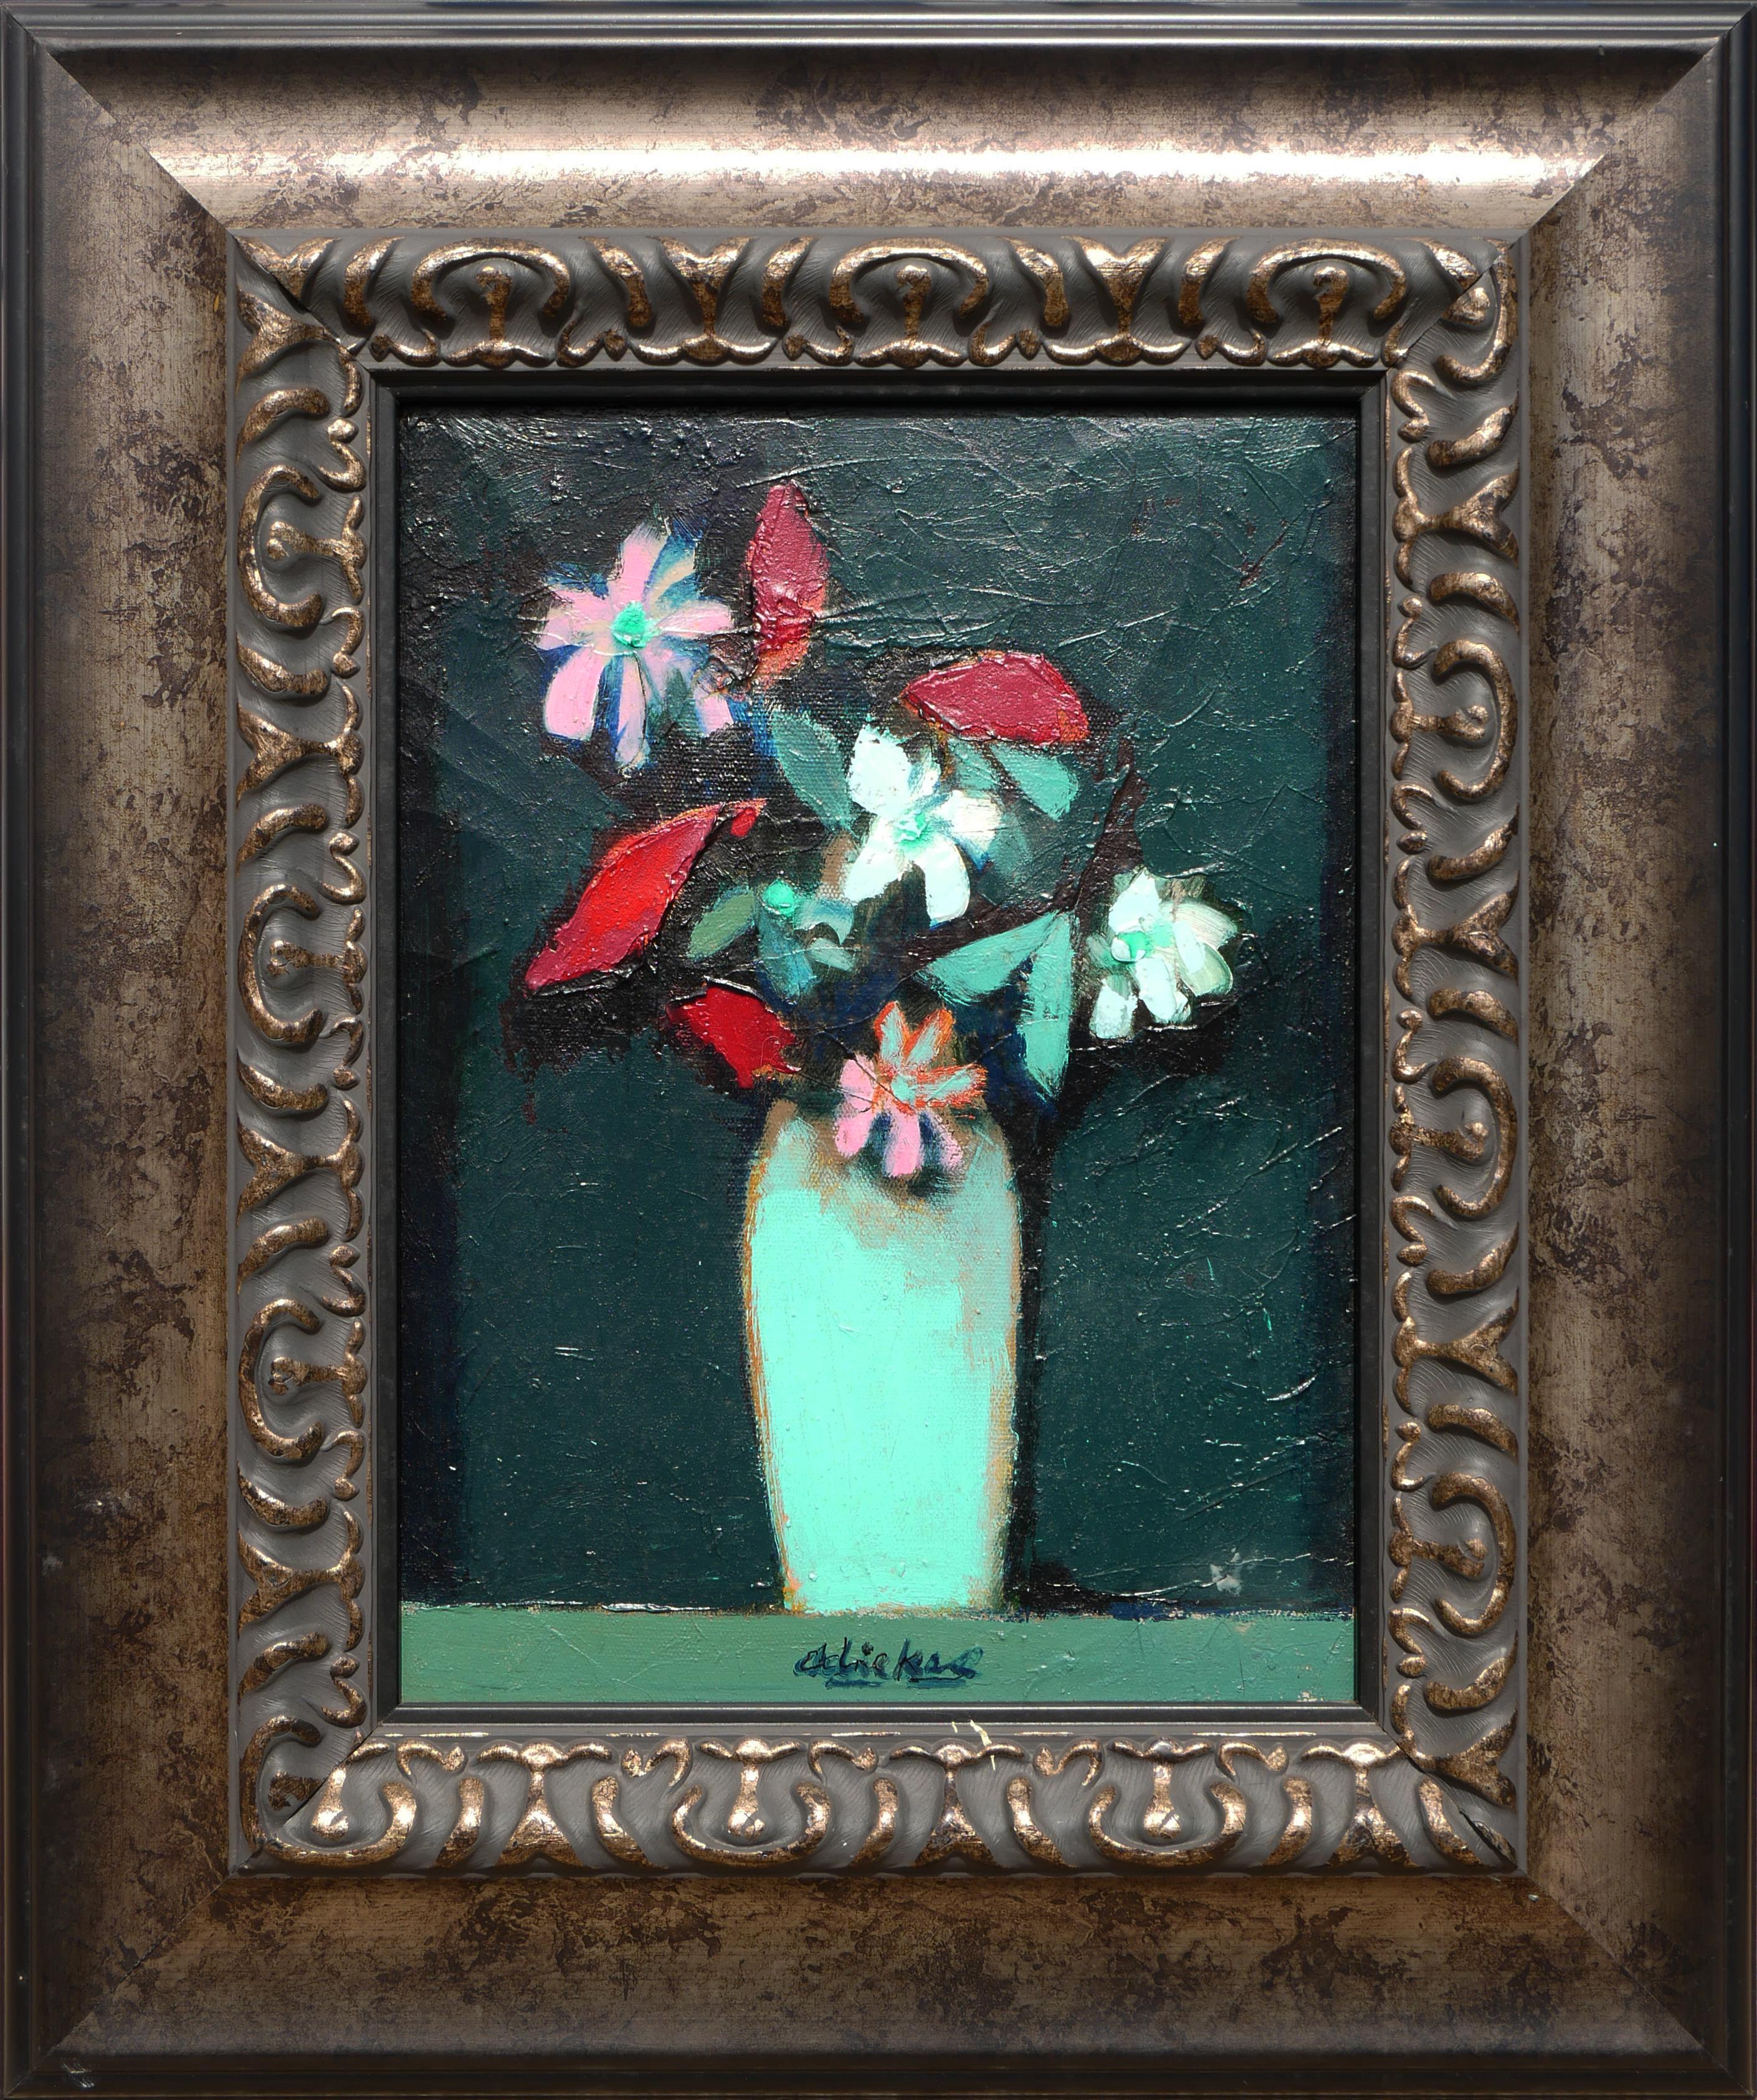 David Adickes Abstract Painting - "Small Bouquet, Blue Vase" Modern Abstract Red, Pink, and Aqua Floral Still Life